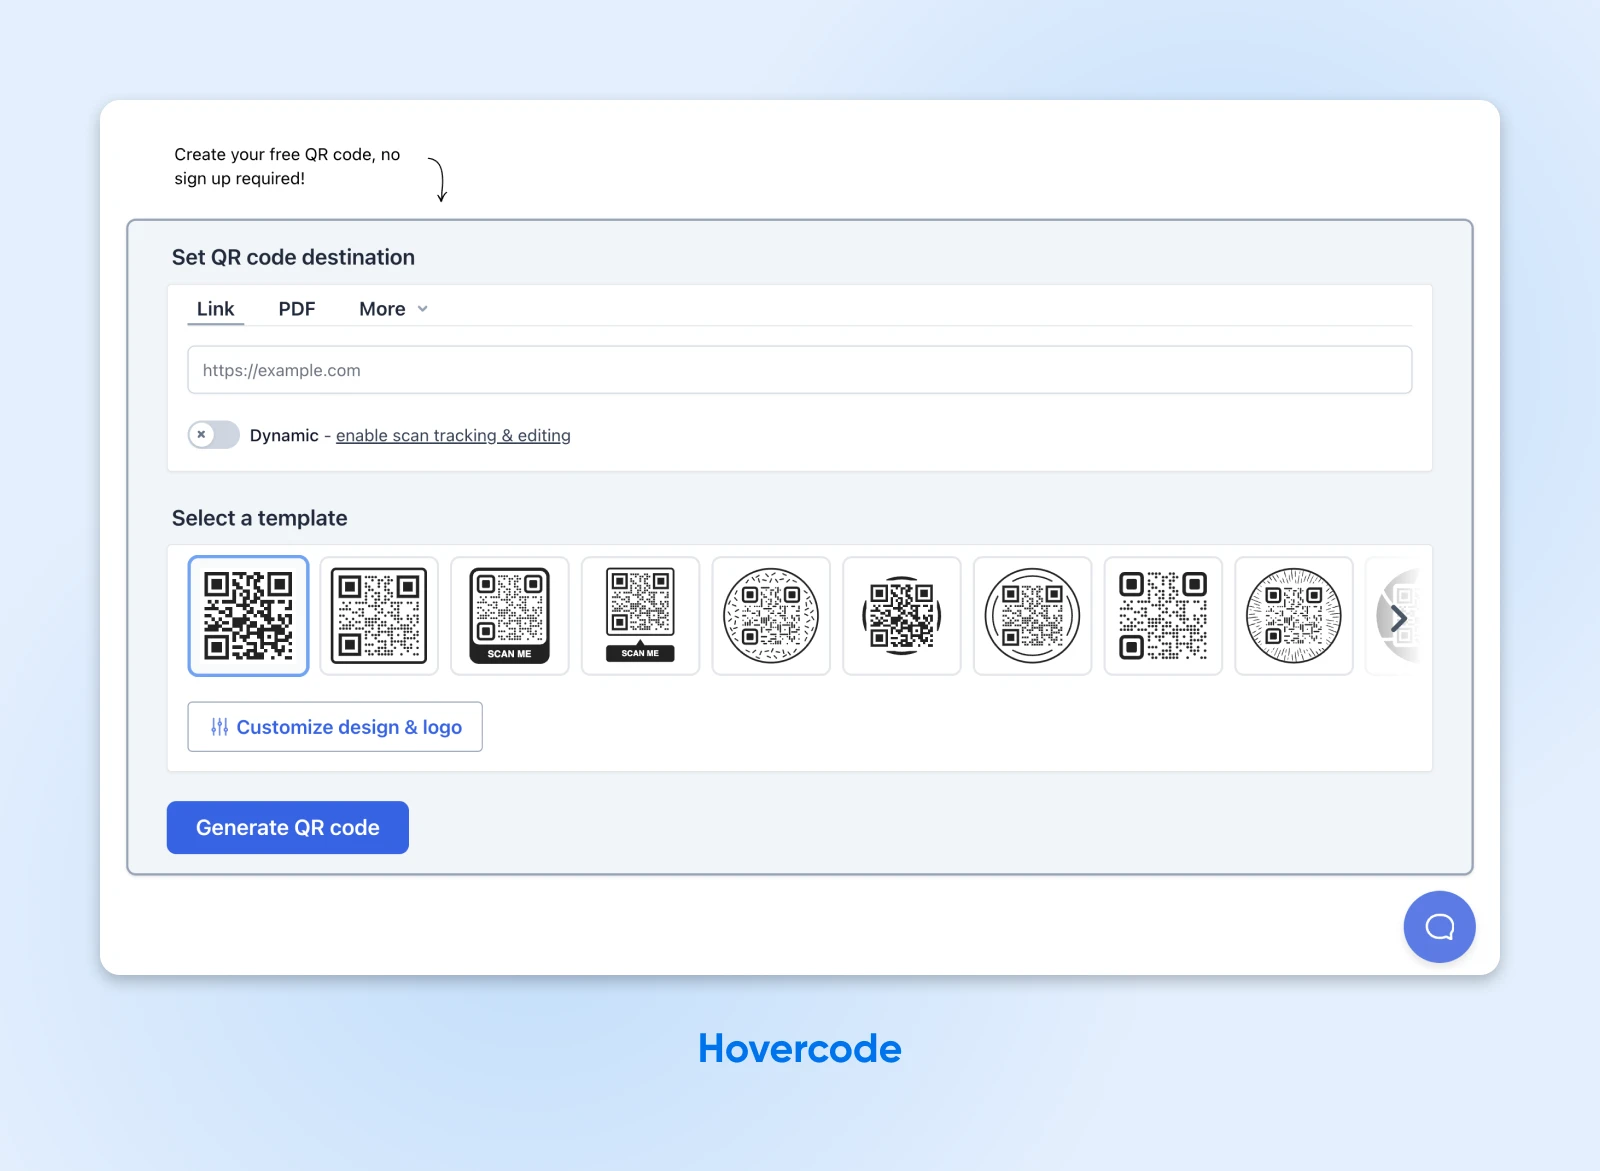 Hovercode shows you a horizontal row of QR code templates to choose from.